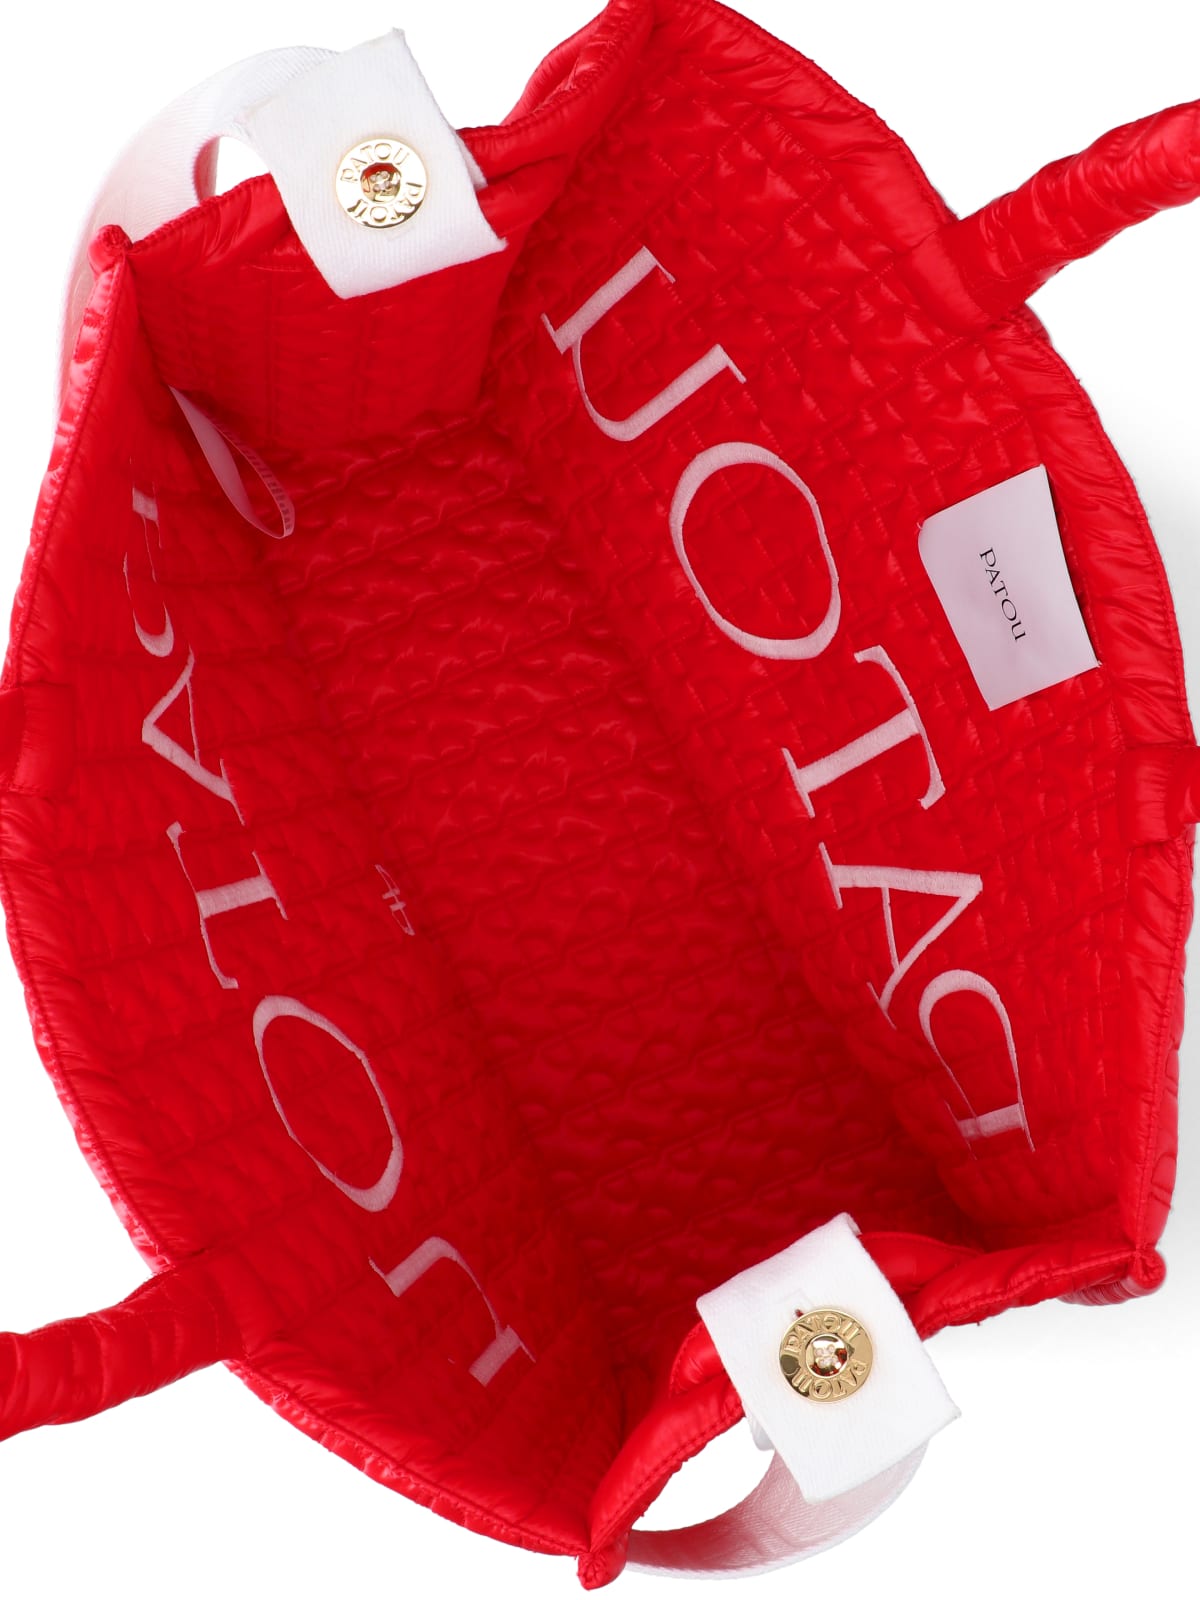 Shop Patou Quilted Tote Bag In Red